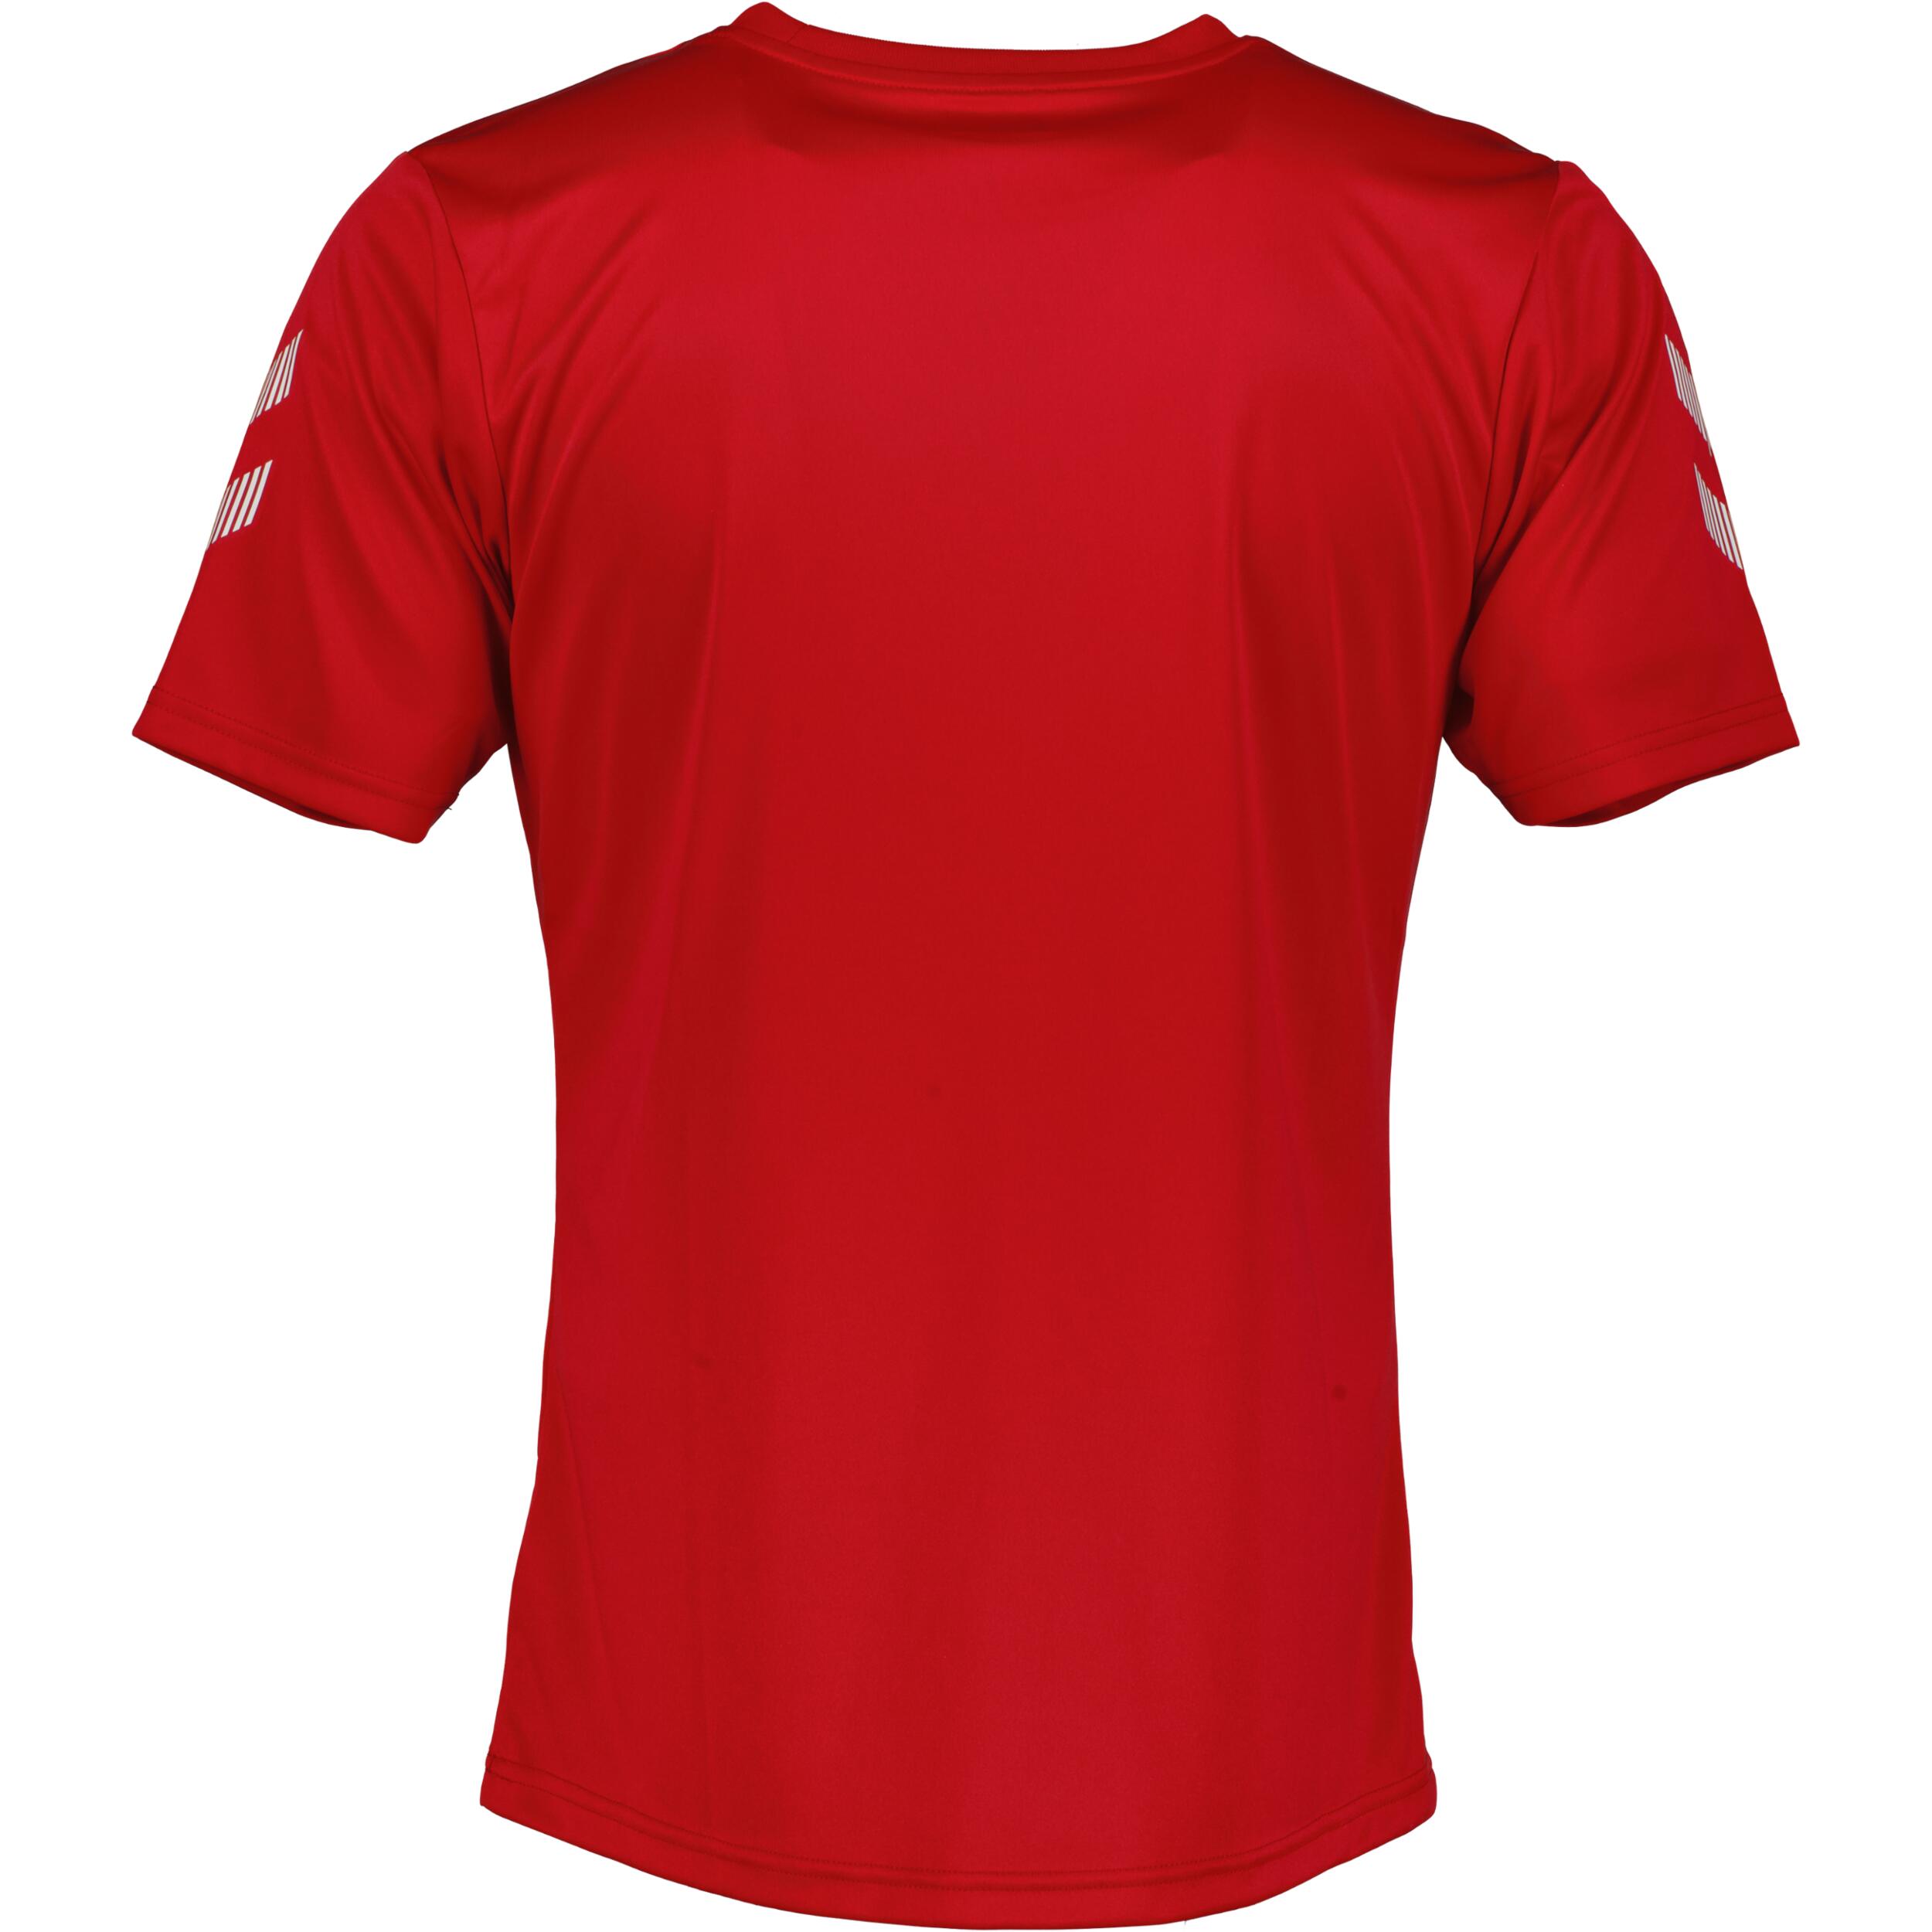 Solo jersey for men, great for football, in true red 2/3